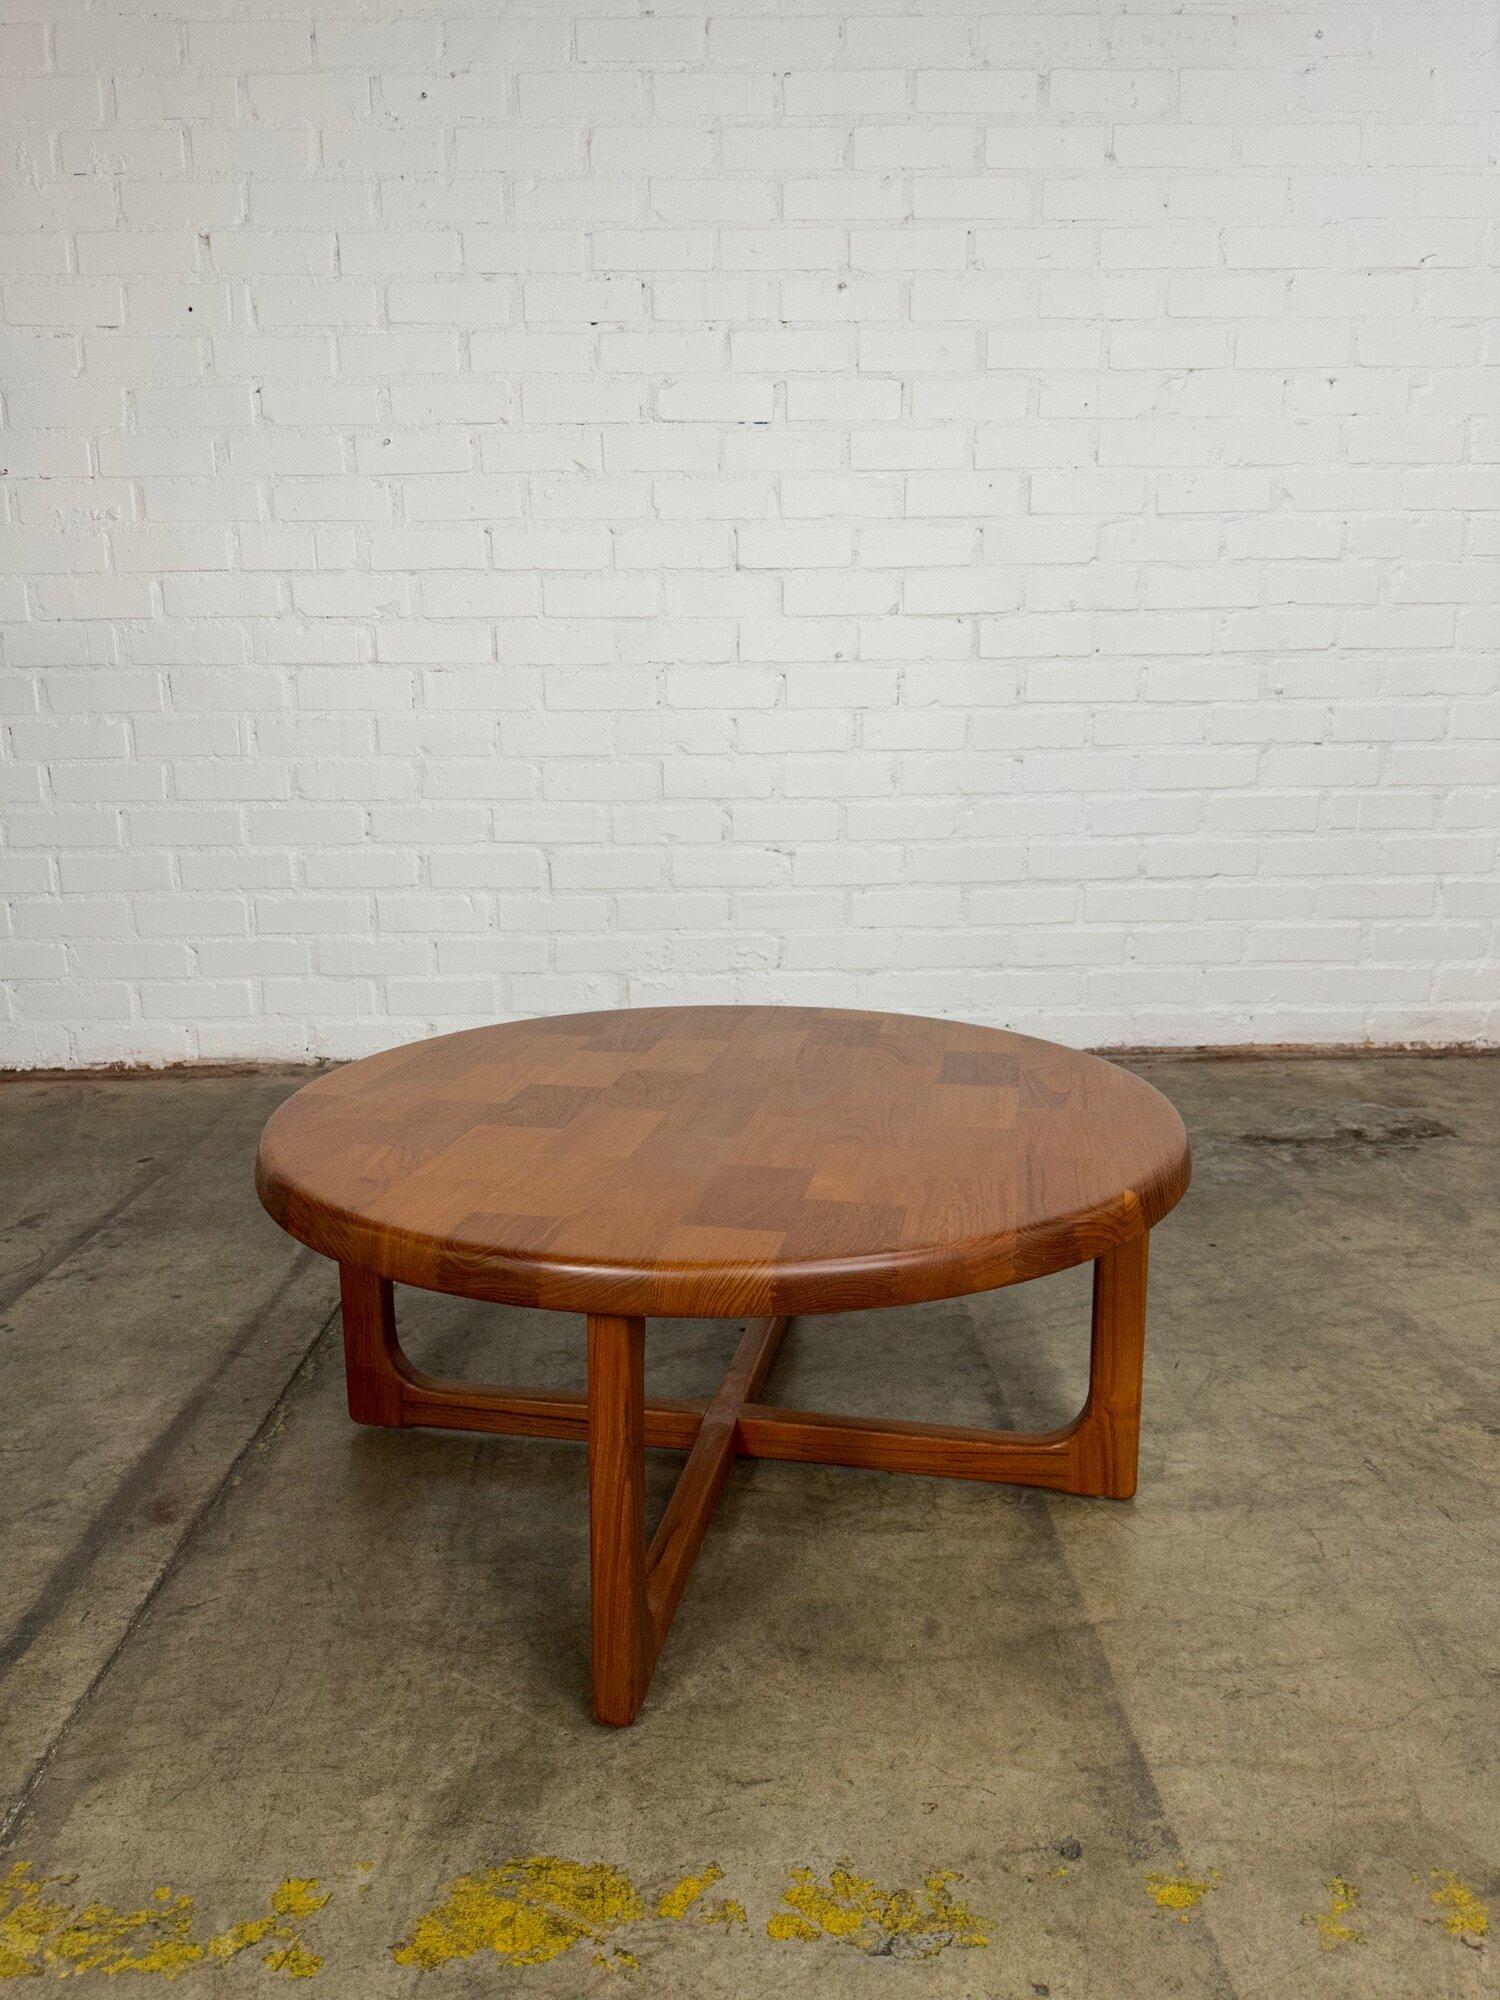 Measures: W38 H17

Fully restored coffee table with beautiful teal wood throughout in a patchwork layout with exposed joinery. This table is strong an sturdy with minimal signs of wear.